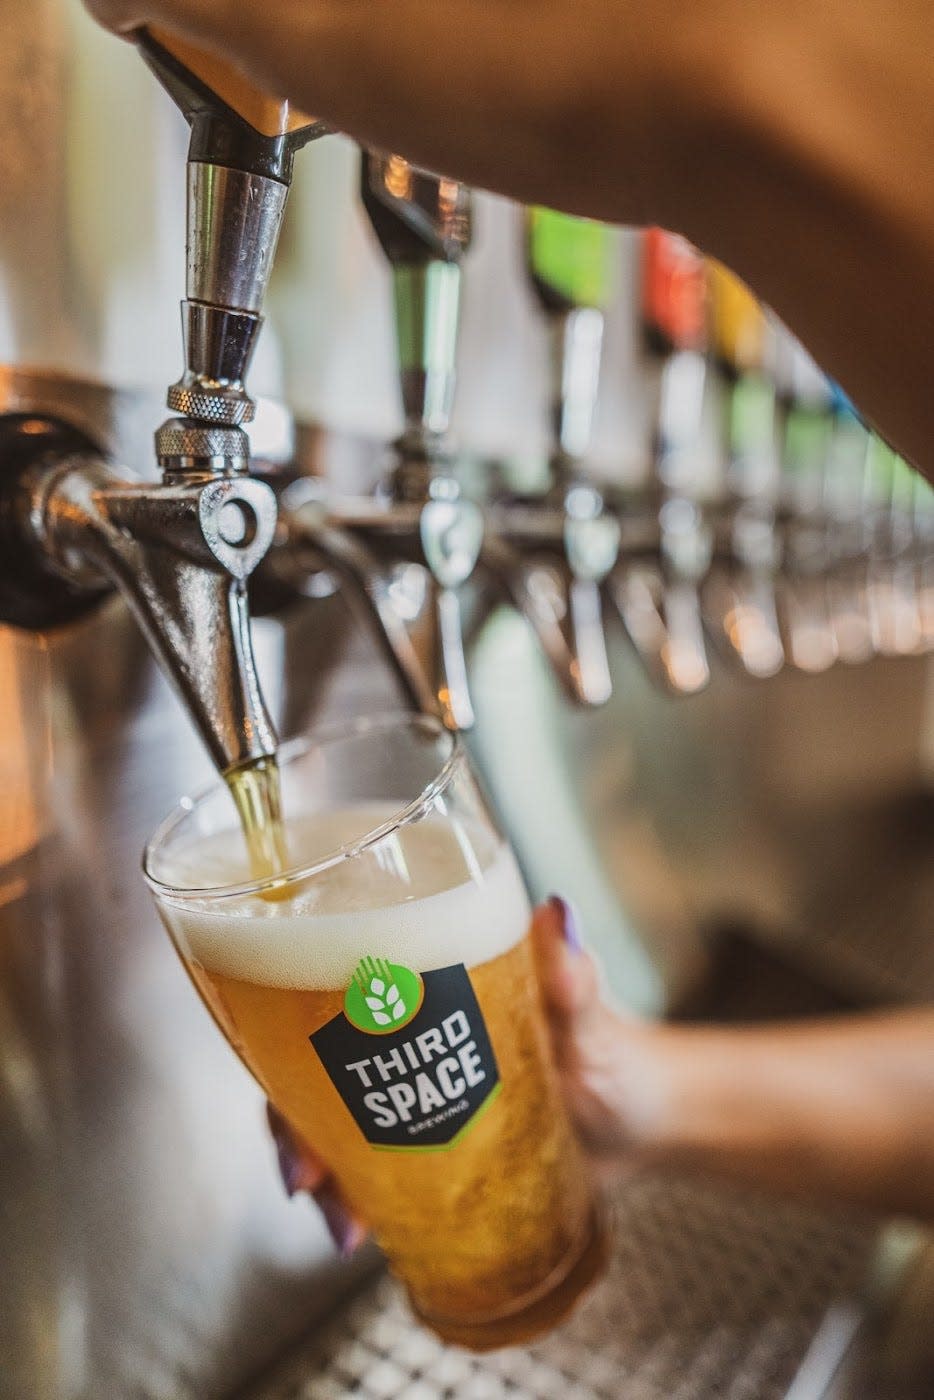 Third Space Brewing, which opened in Milwaukee in 2016, is opening a location in Menomonee Falls. Third Space Innovation Brewhouse is expected to open in June at Good Hope Road and Appleton Avenue.